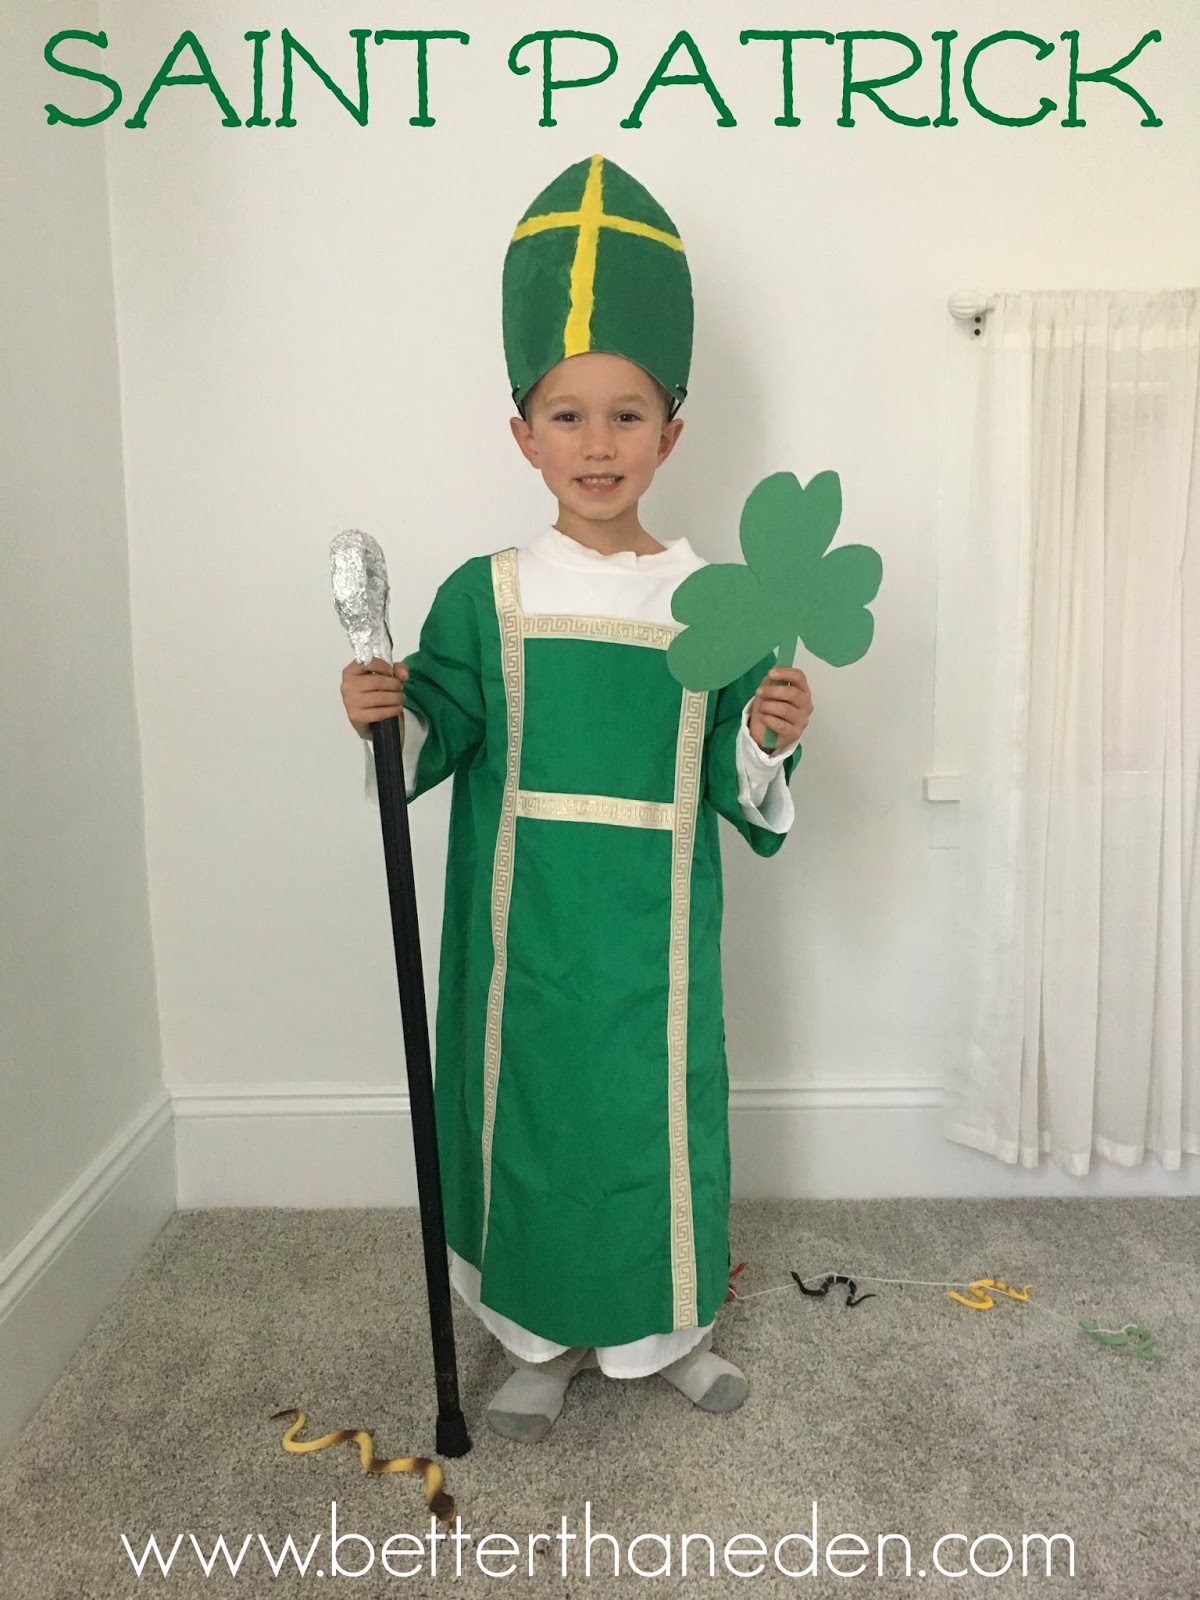 All Saints' Day Costumes and Party - 2016 - Mary Haseltine